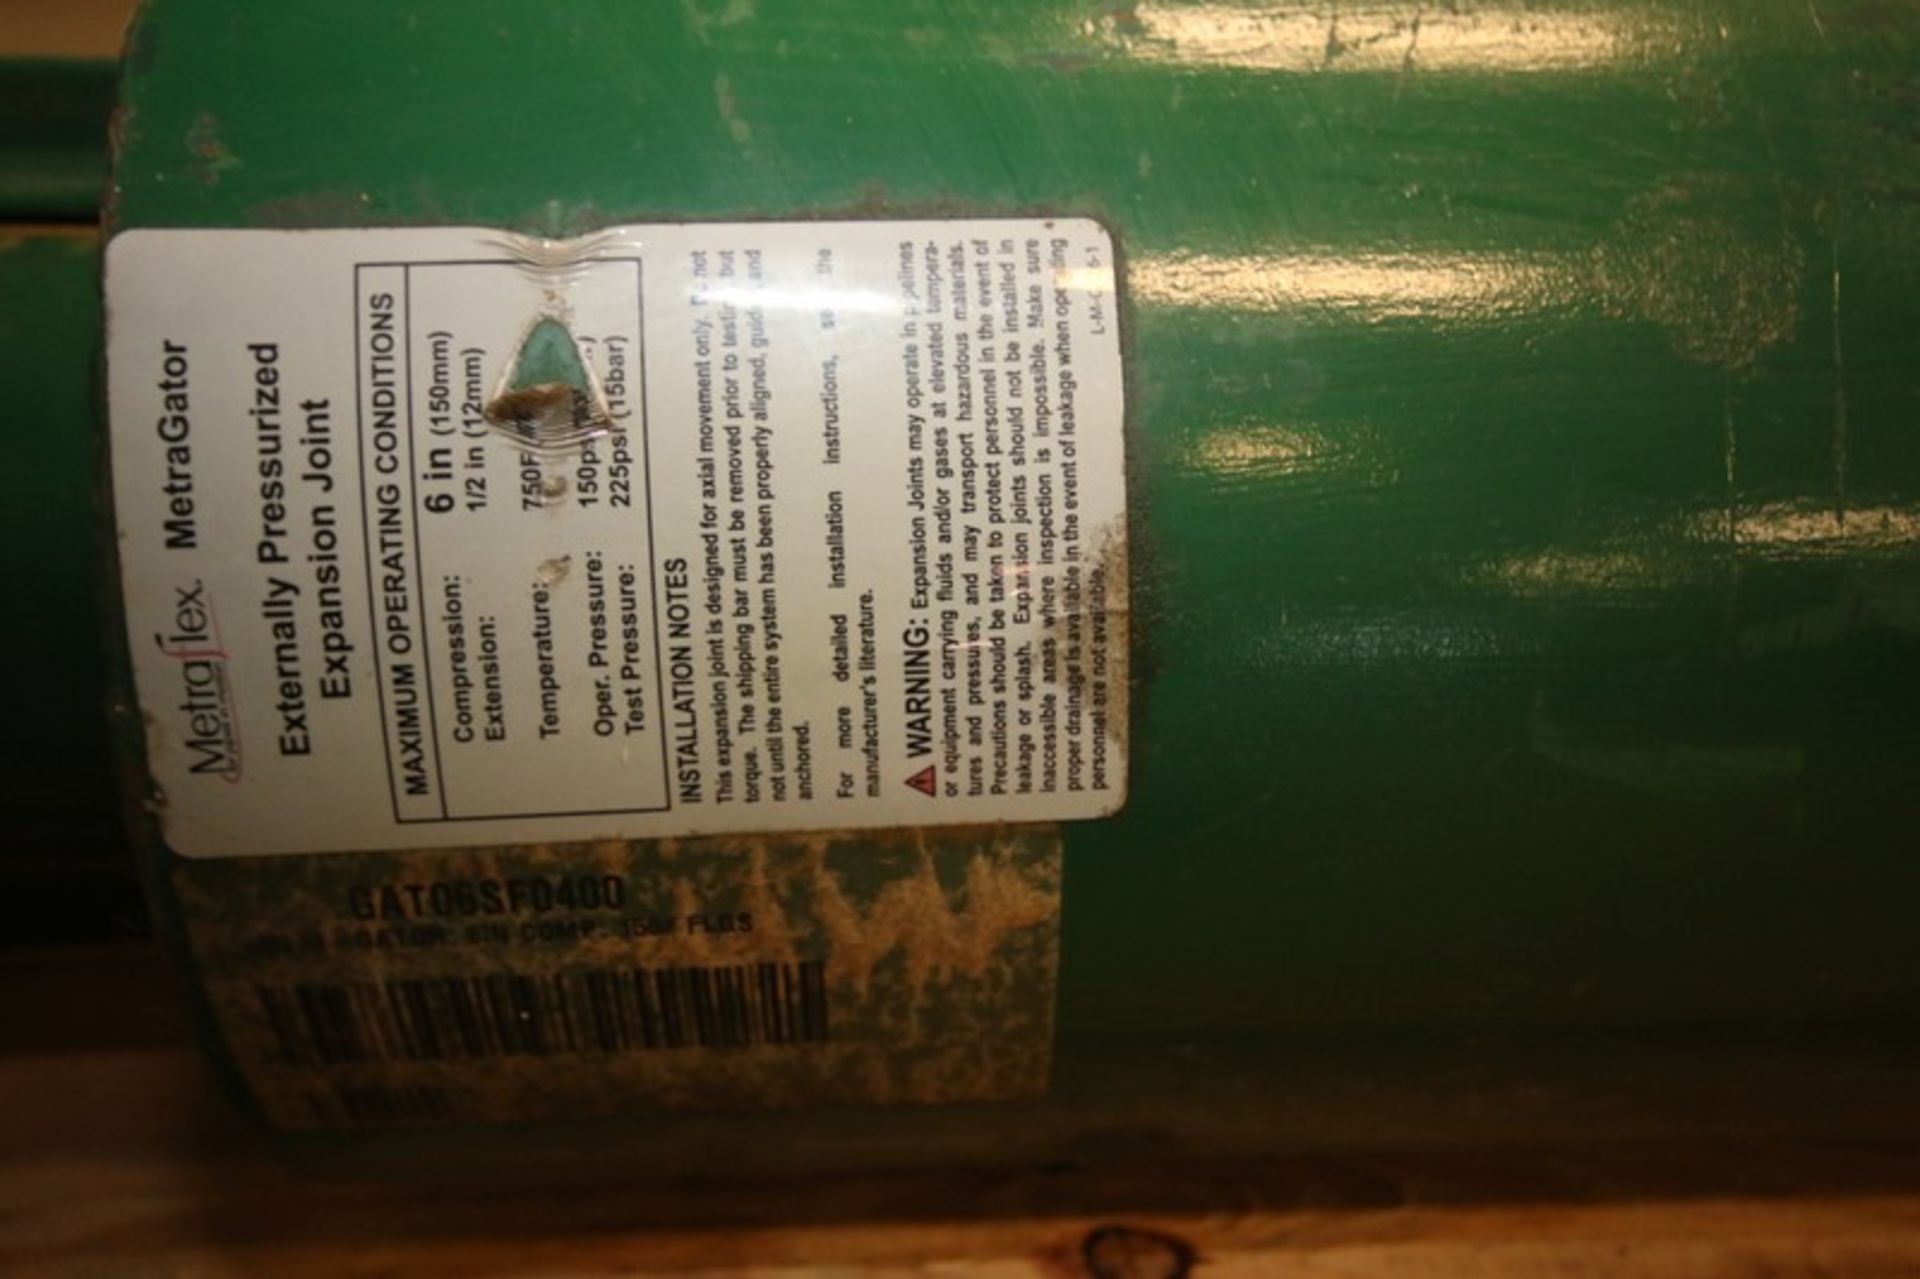 Metraflex Metagator 6" Expansion Joint, Type GAT06SF0400 (INV#88383)(Located @ the MDG Auction - Image 2 of 2